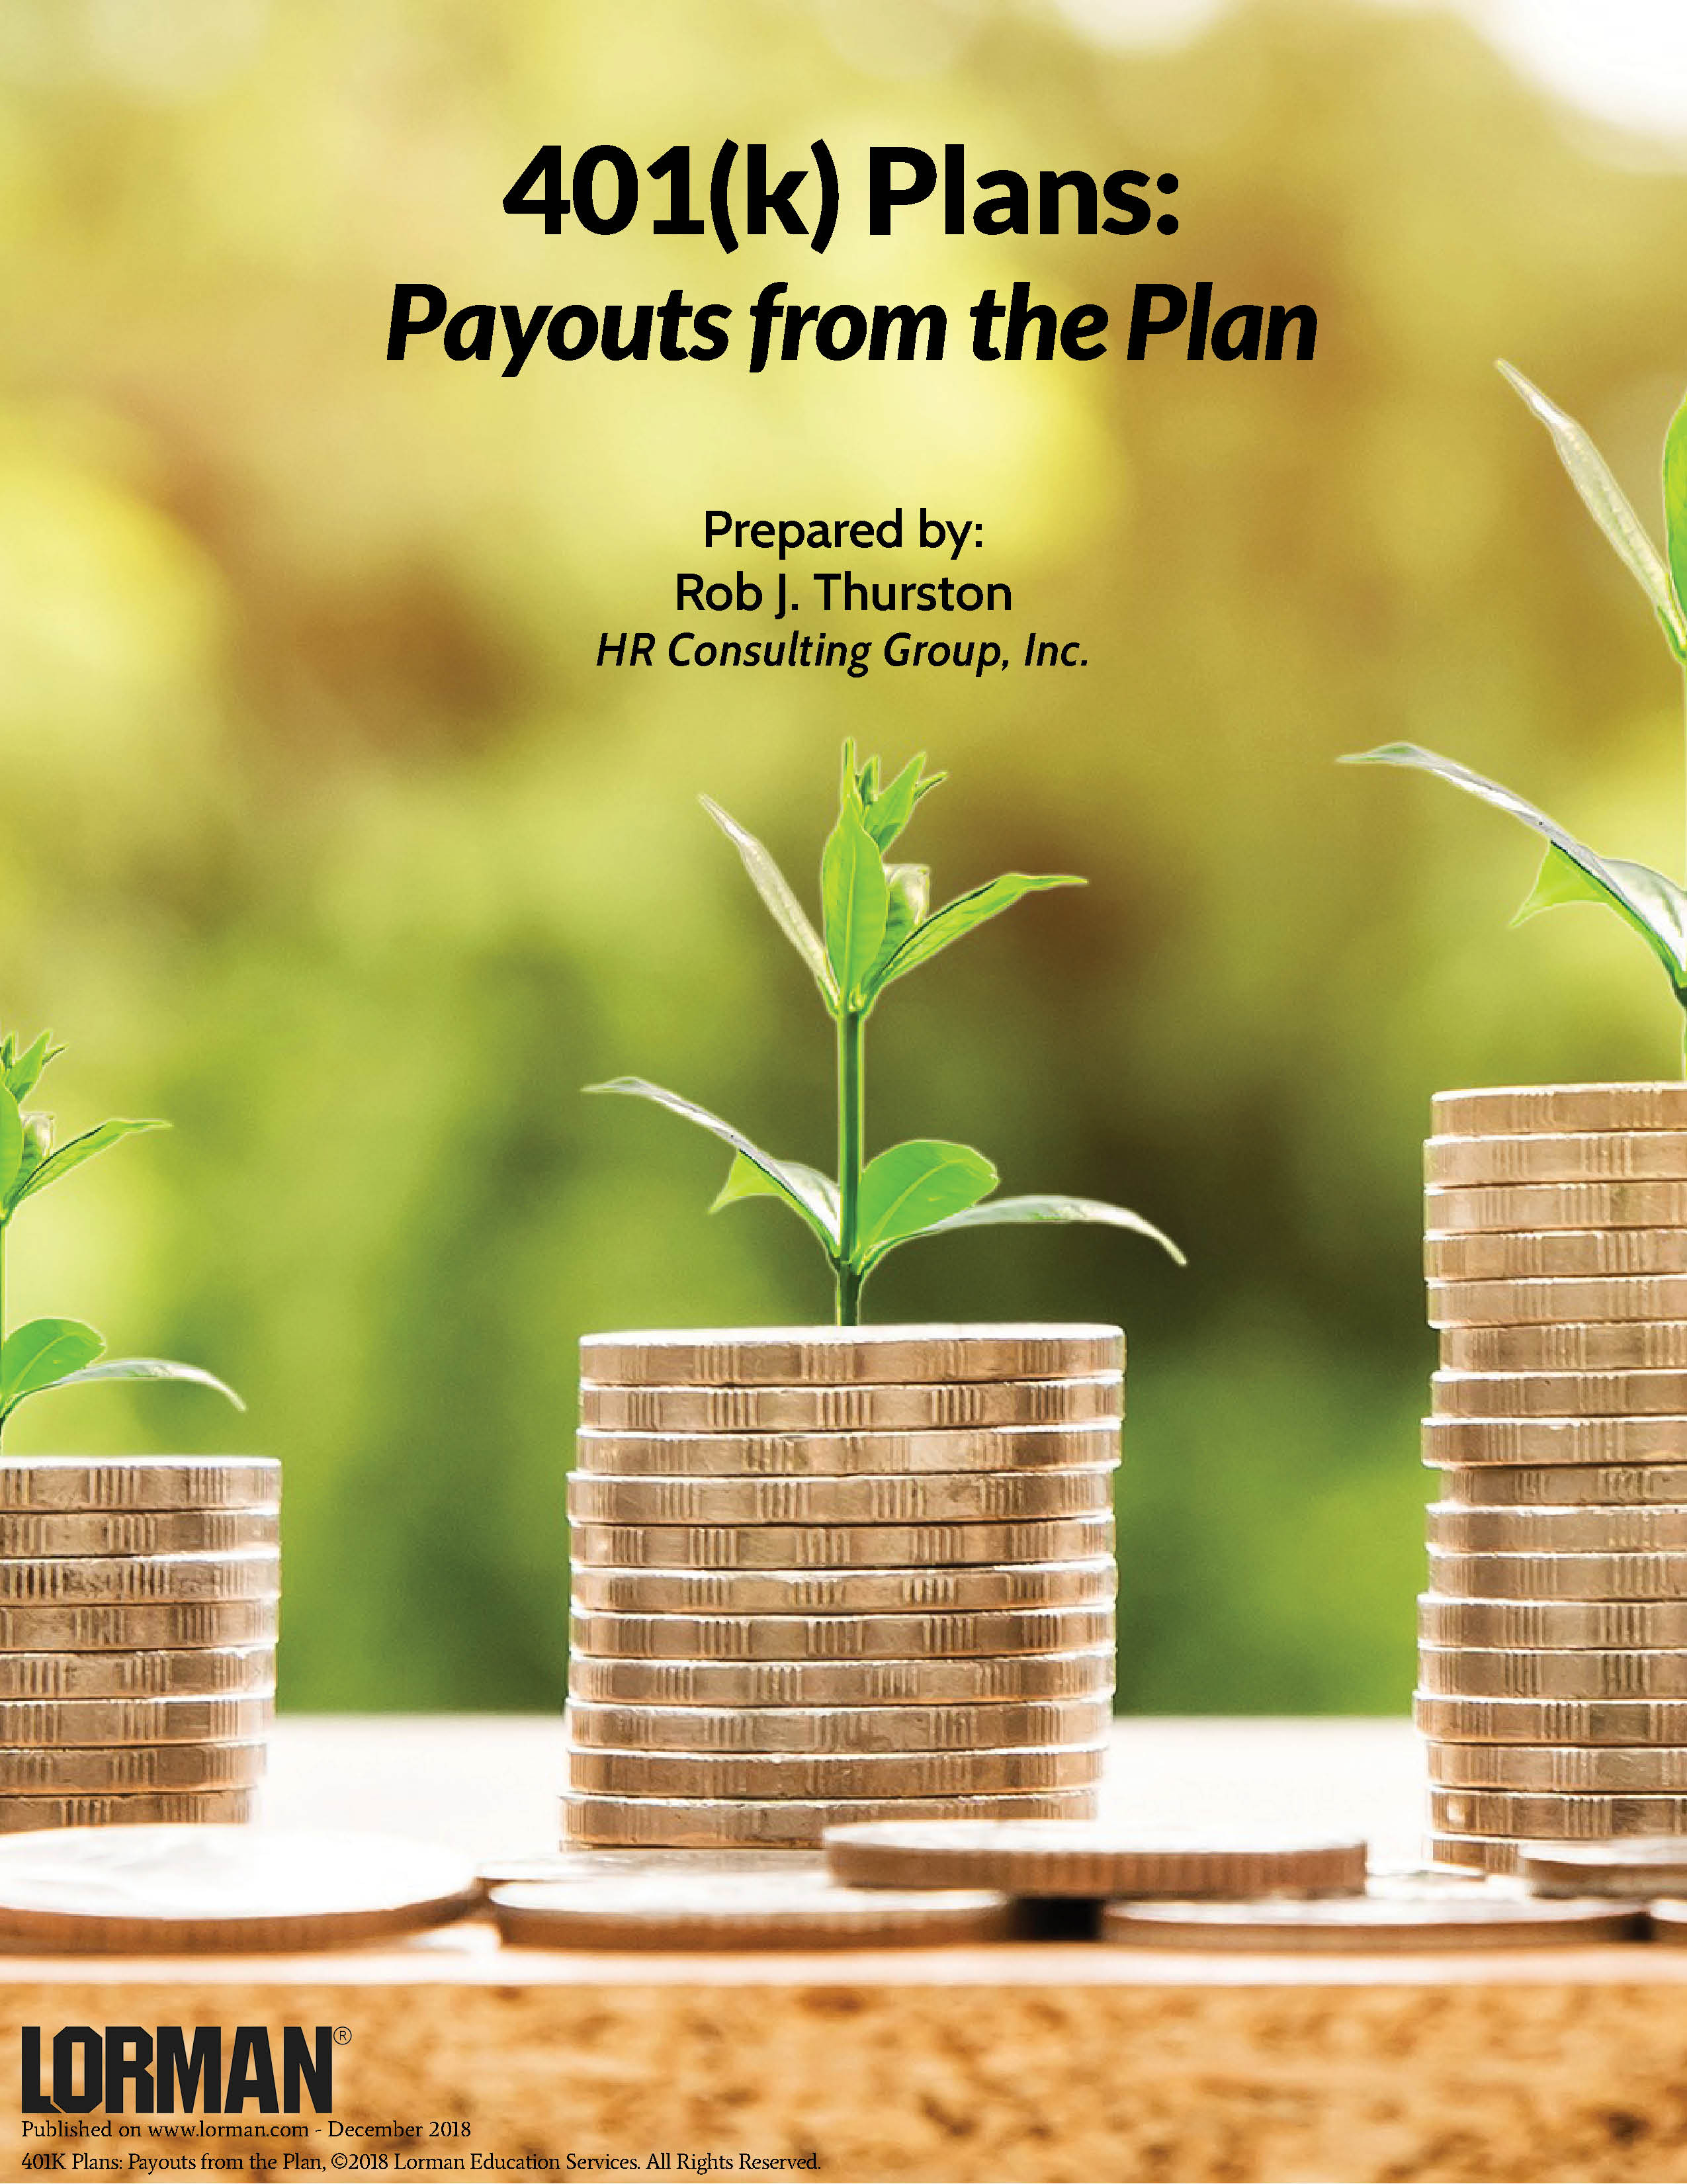 401(k) Plans: Payouts from the Plan